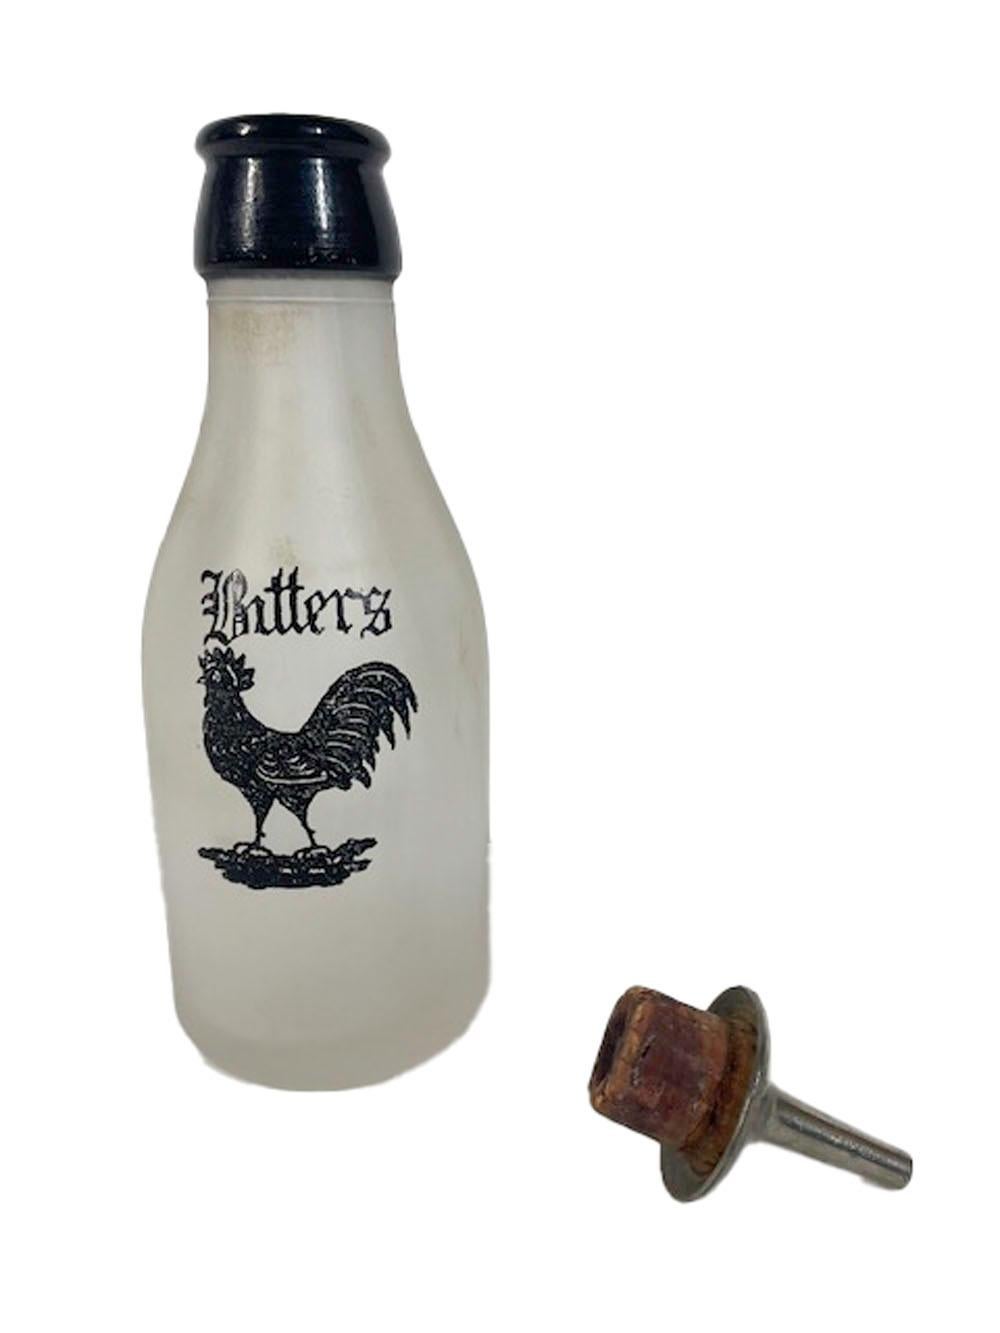 Art Deco frosted bar bottle for bitters with a black enamel collar, rooster and label 